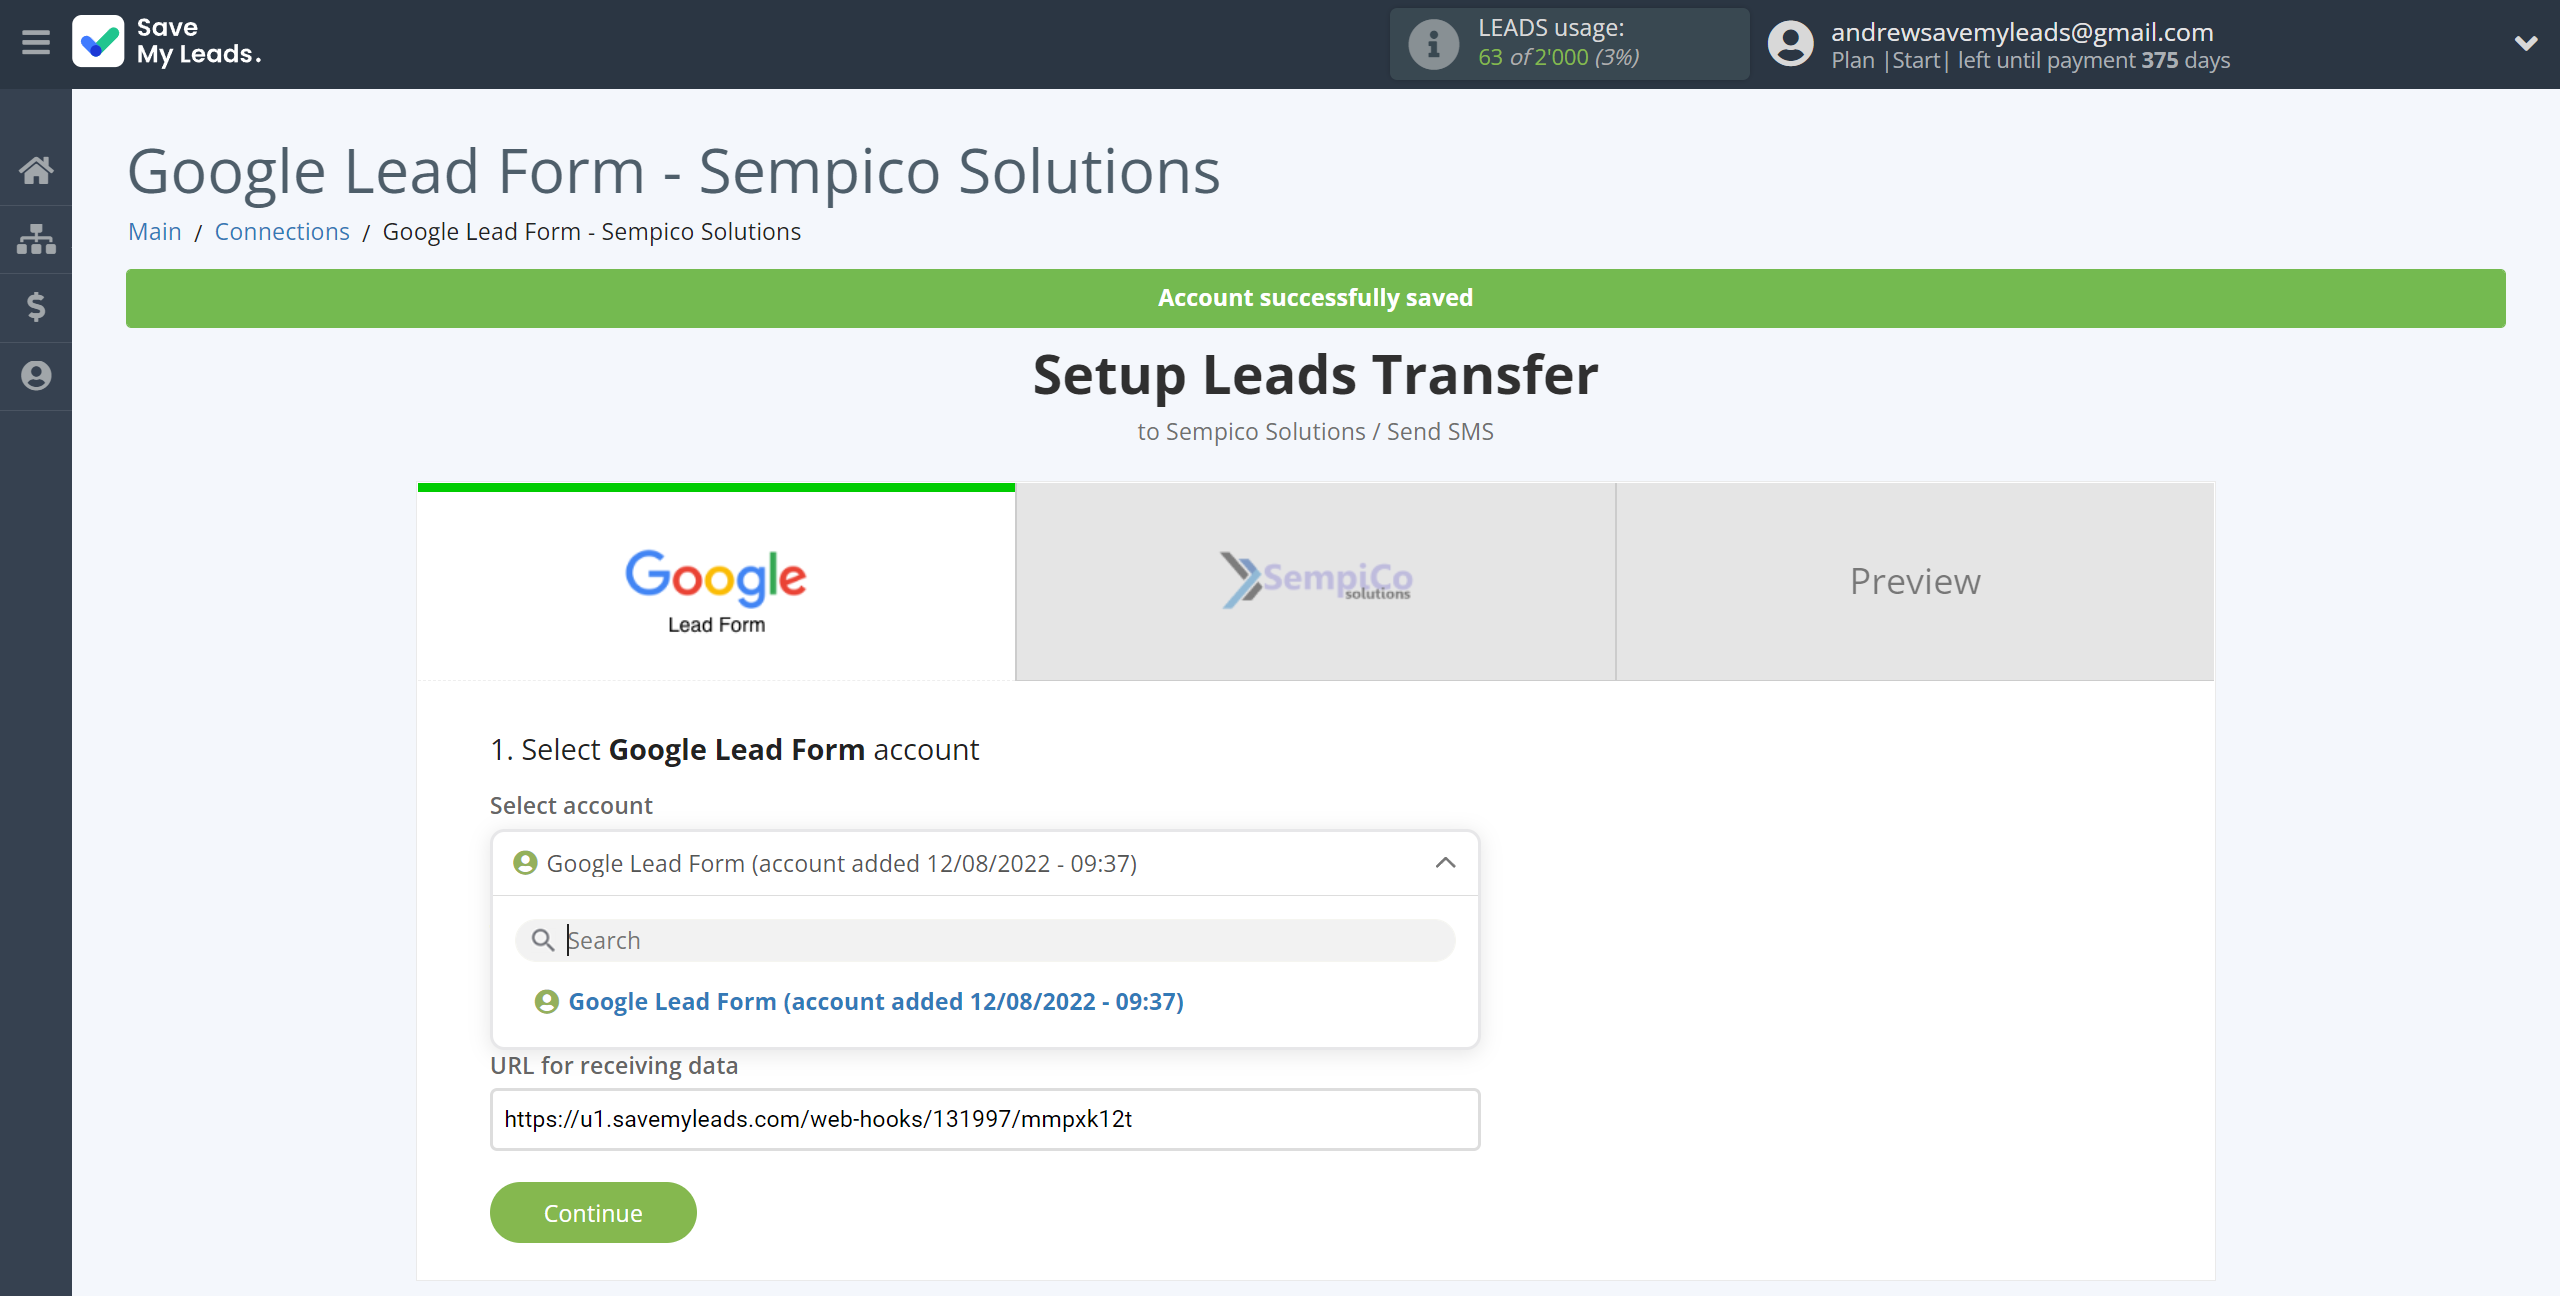 How to Connect Google Lead Form with Sempico Solutions | Data Source account selection